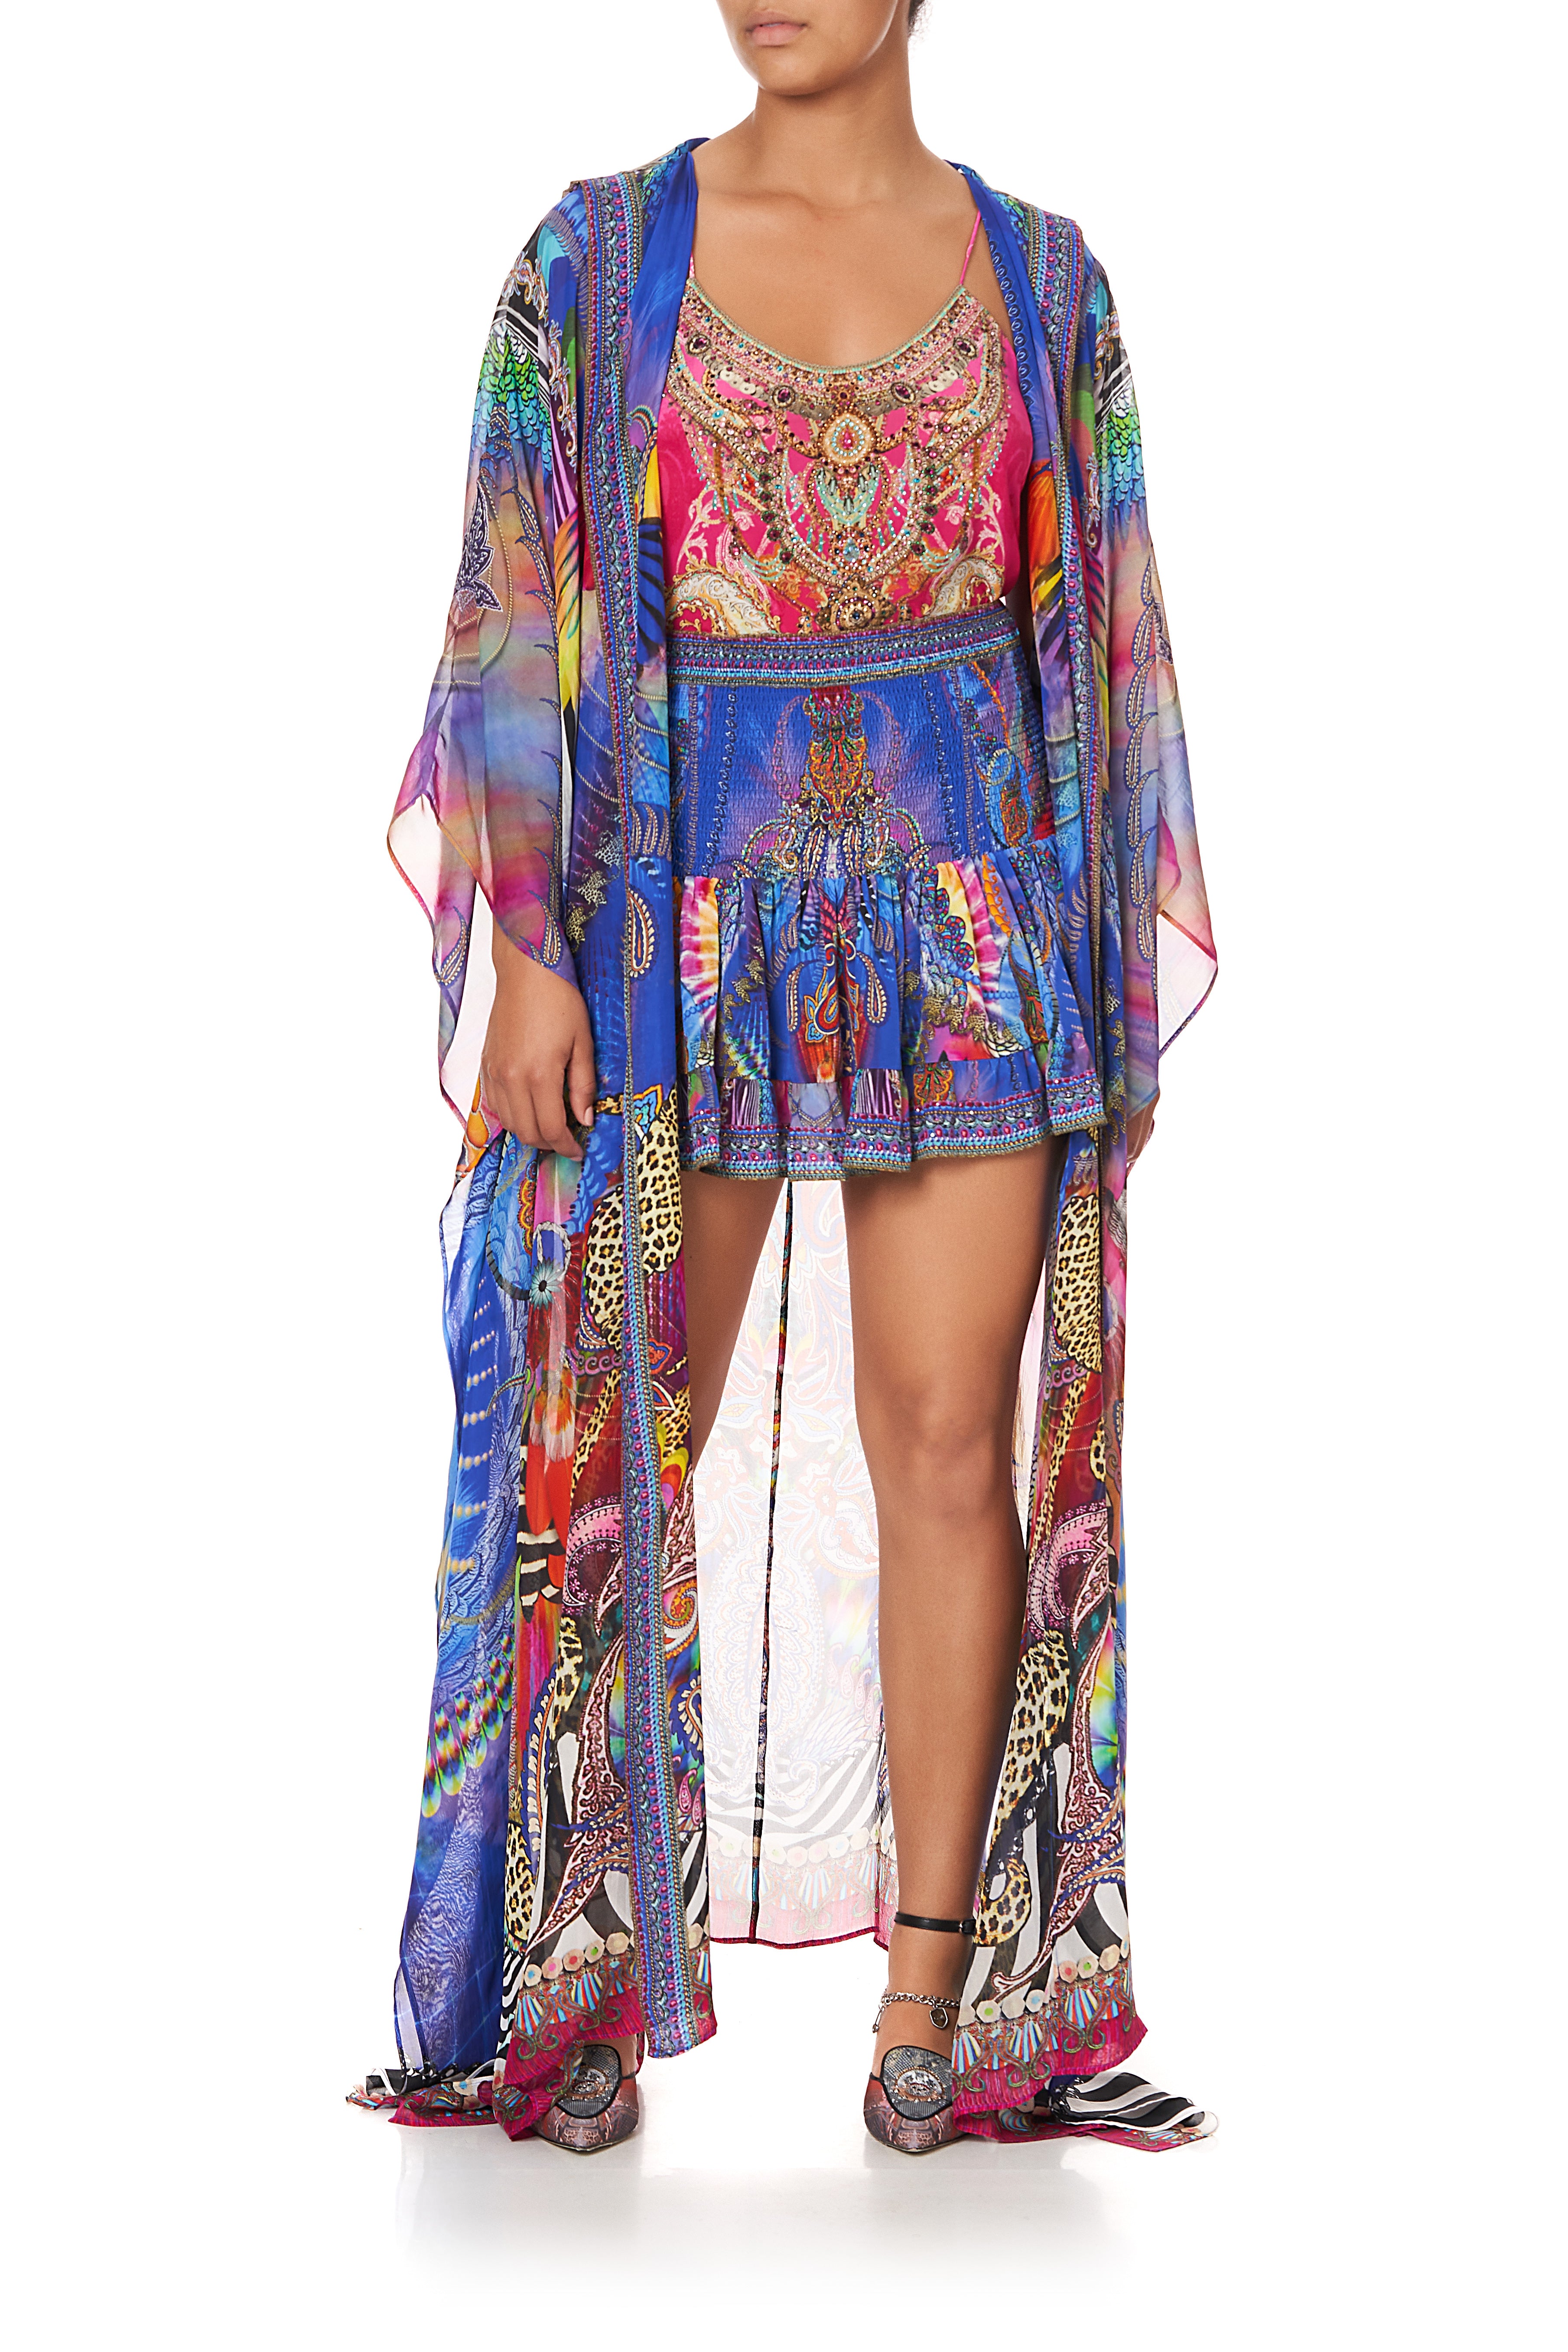 OVERSIZED ROBE PSYCHEDELICA